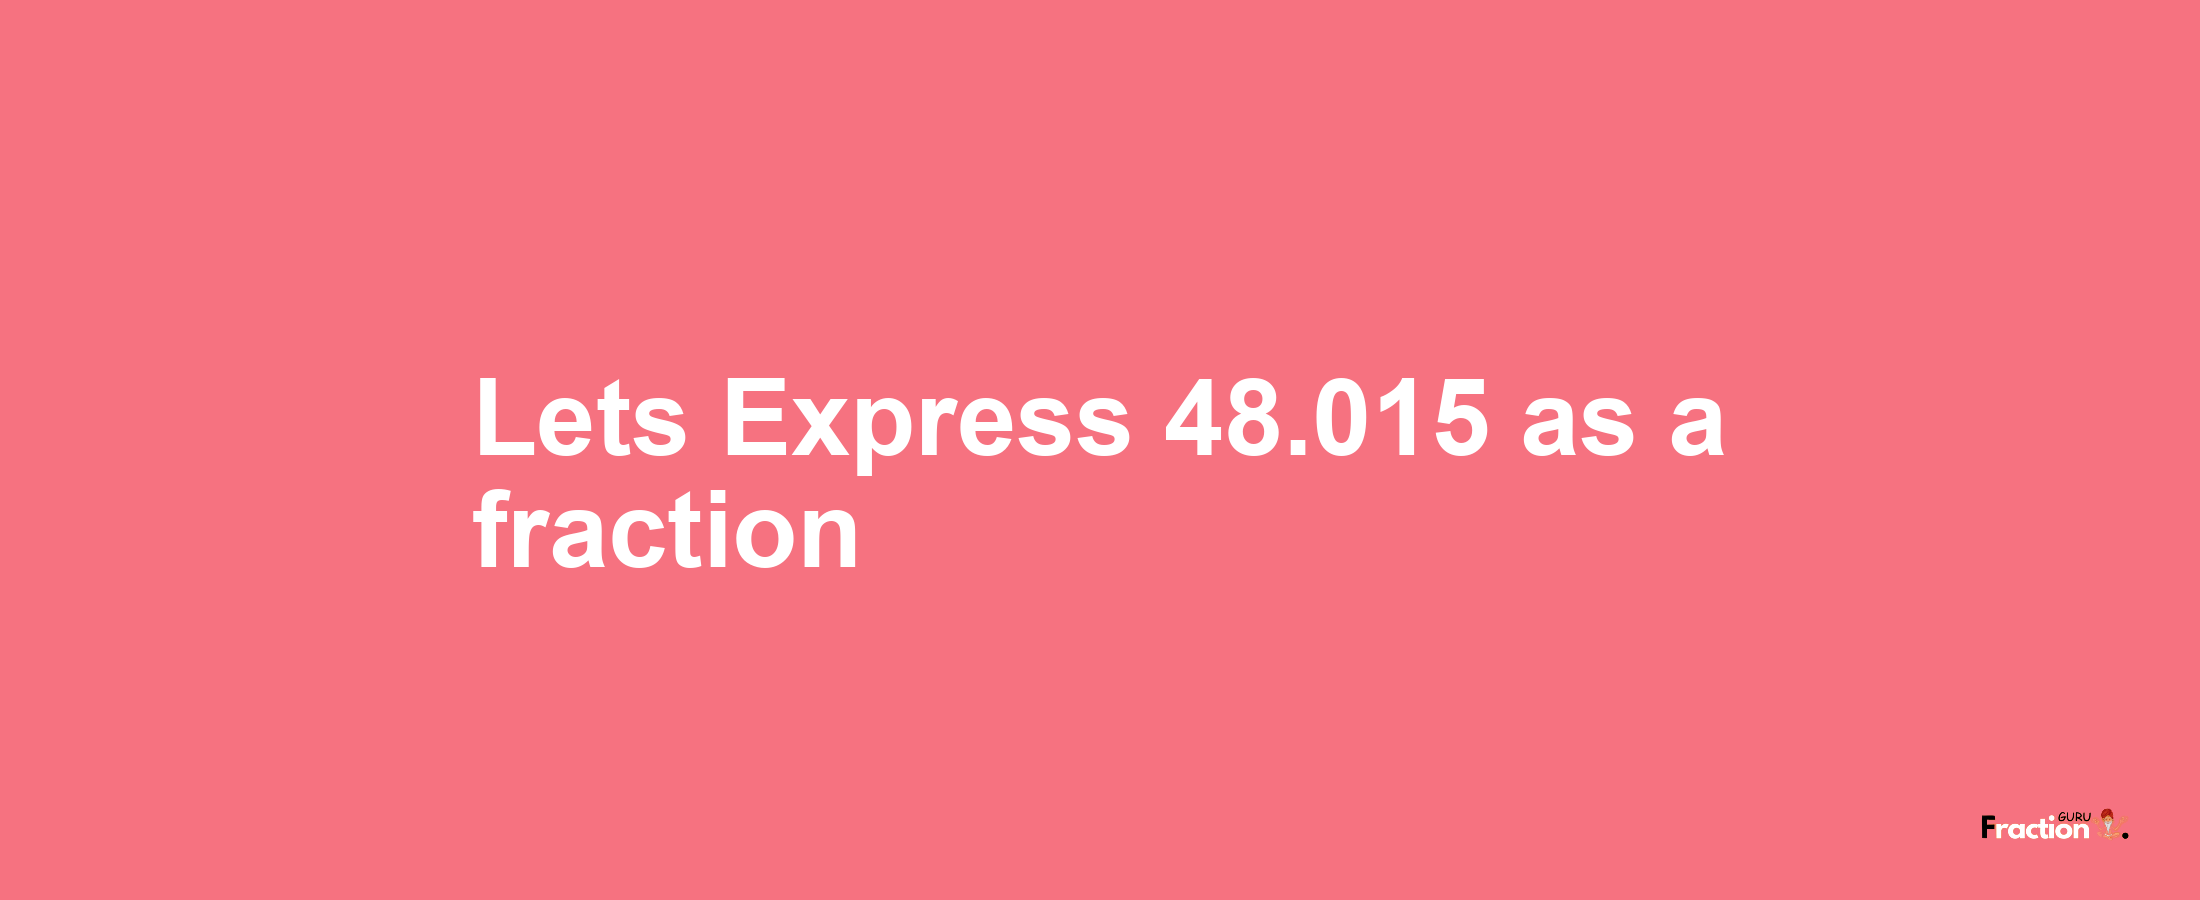 Lets Express 48.015 as afraction